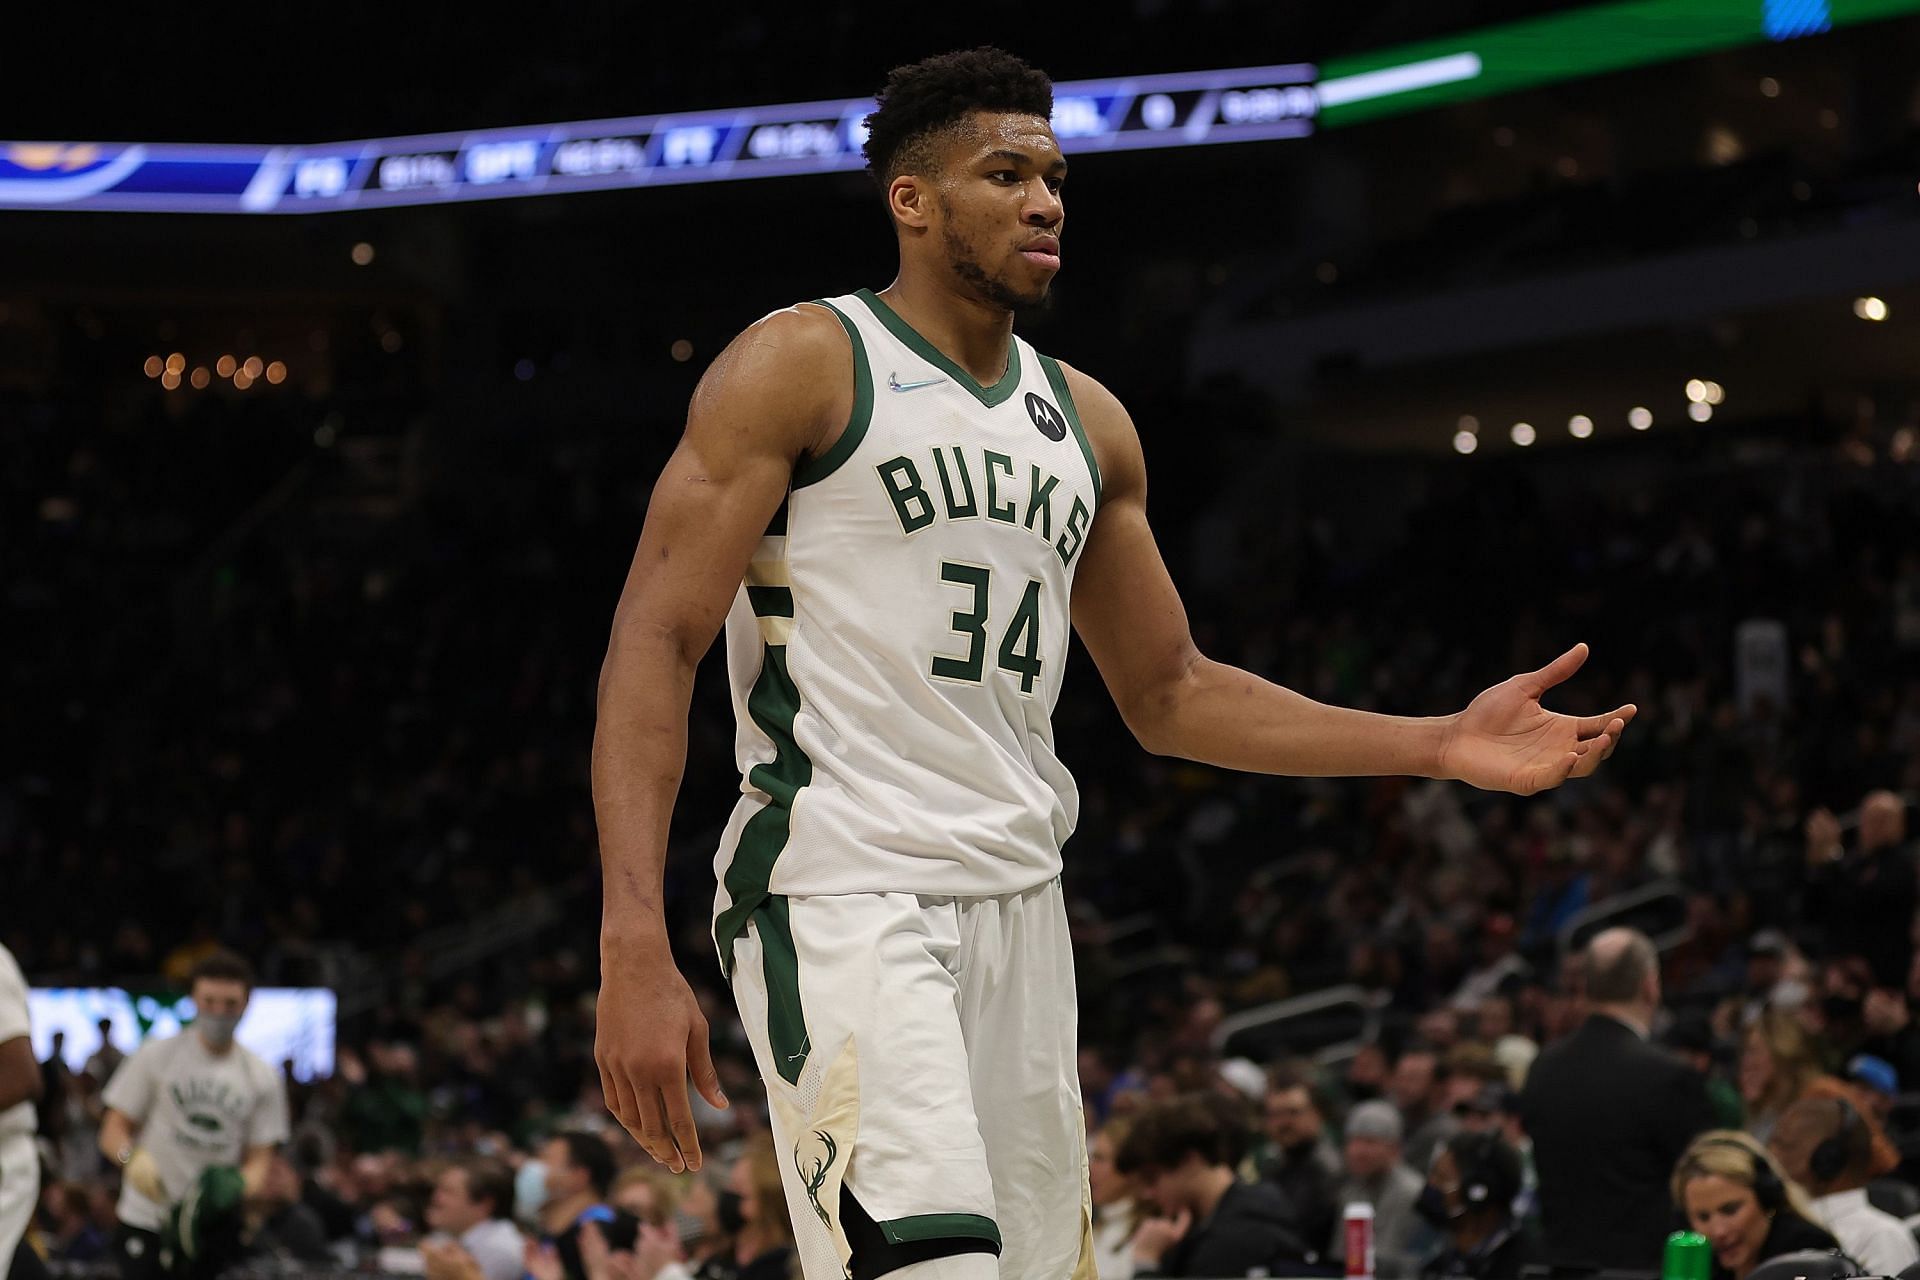 Giannis Antetokounmpo of the Milwaukee Bucks against the Indiana Pacers